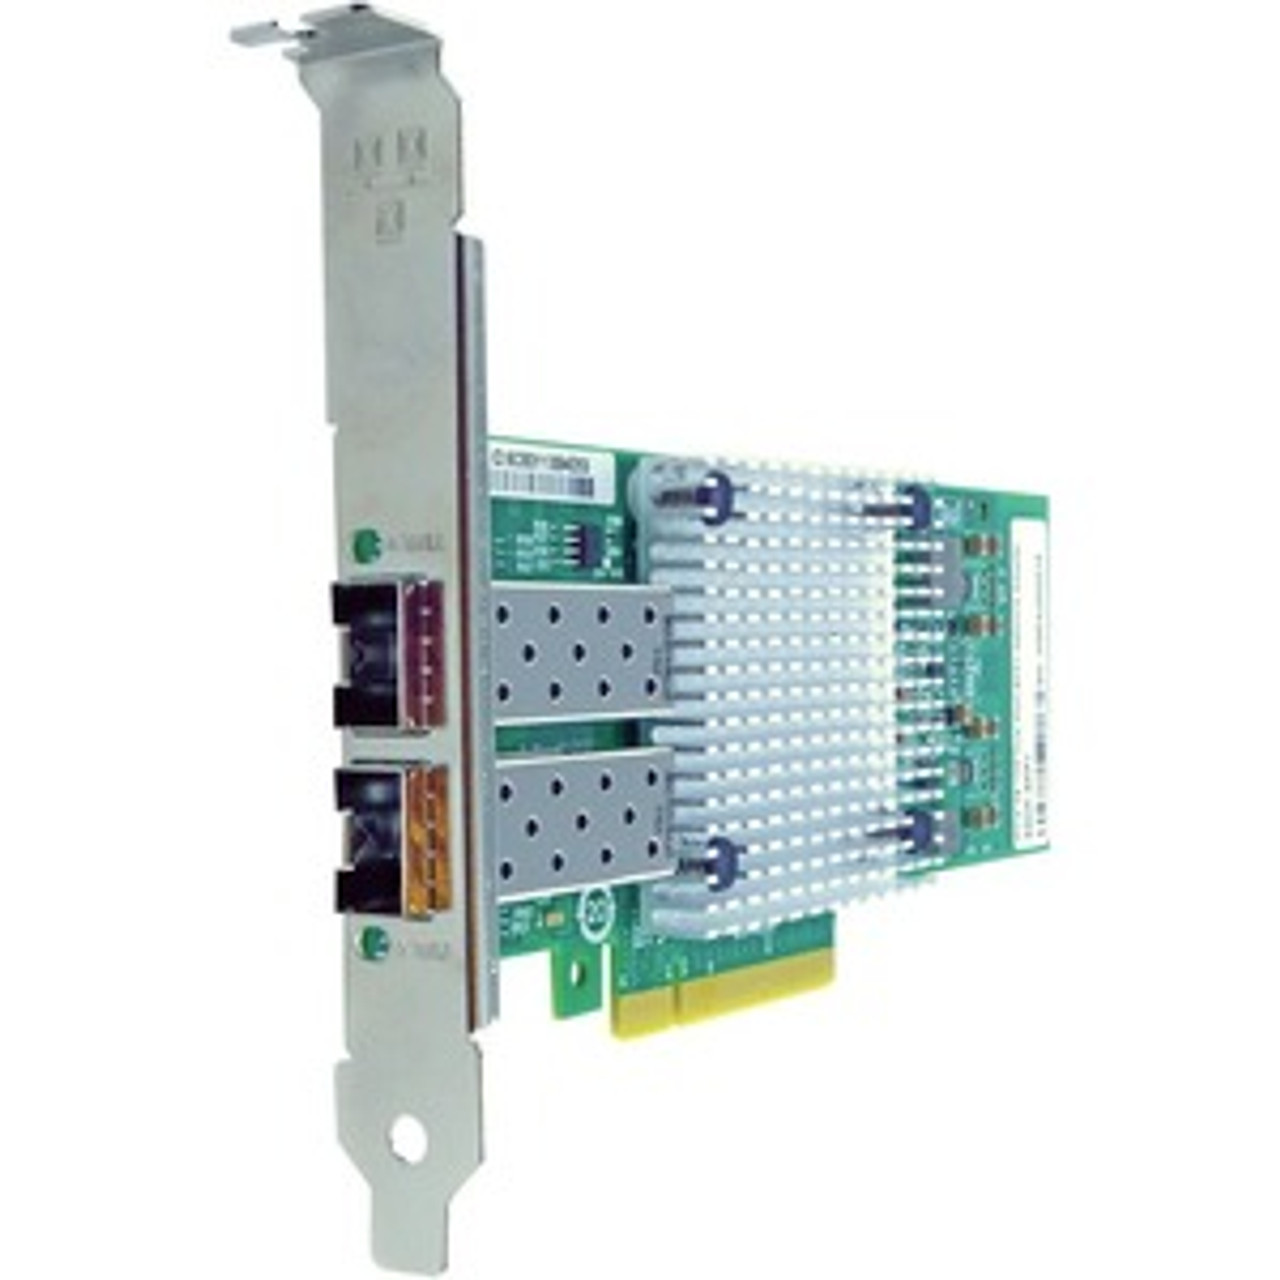 OCE11102-FM-AX Axiom OneConnect 2-Ports 10Gbps PCI Express x8 FCoE Converged Network Adapter for Emulex Oce1110